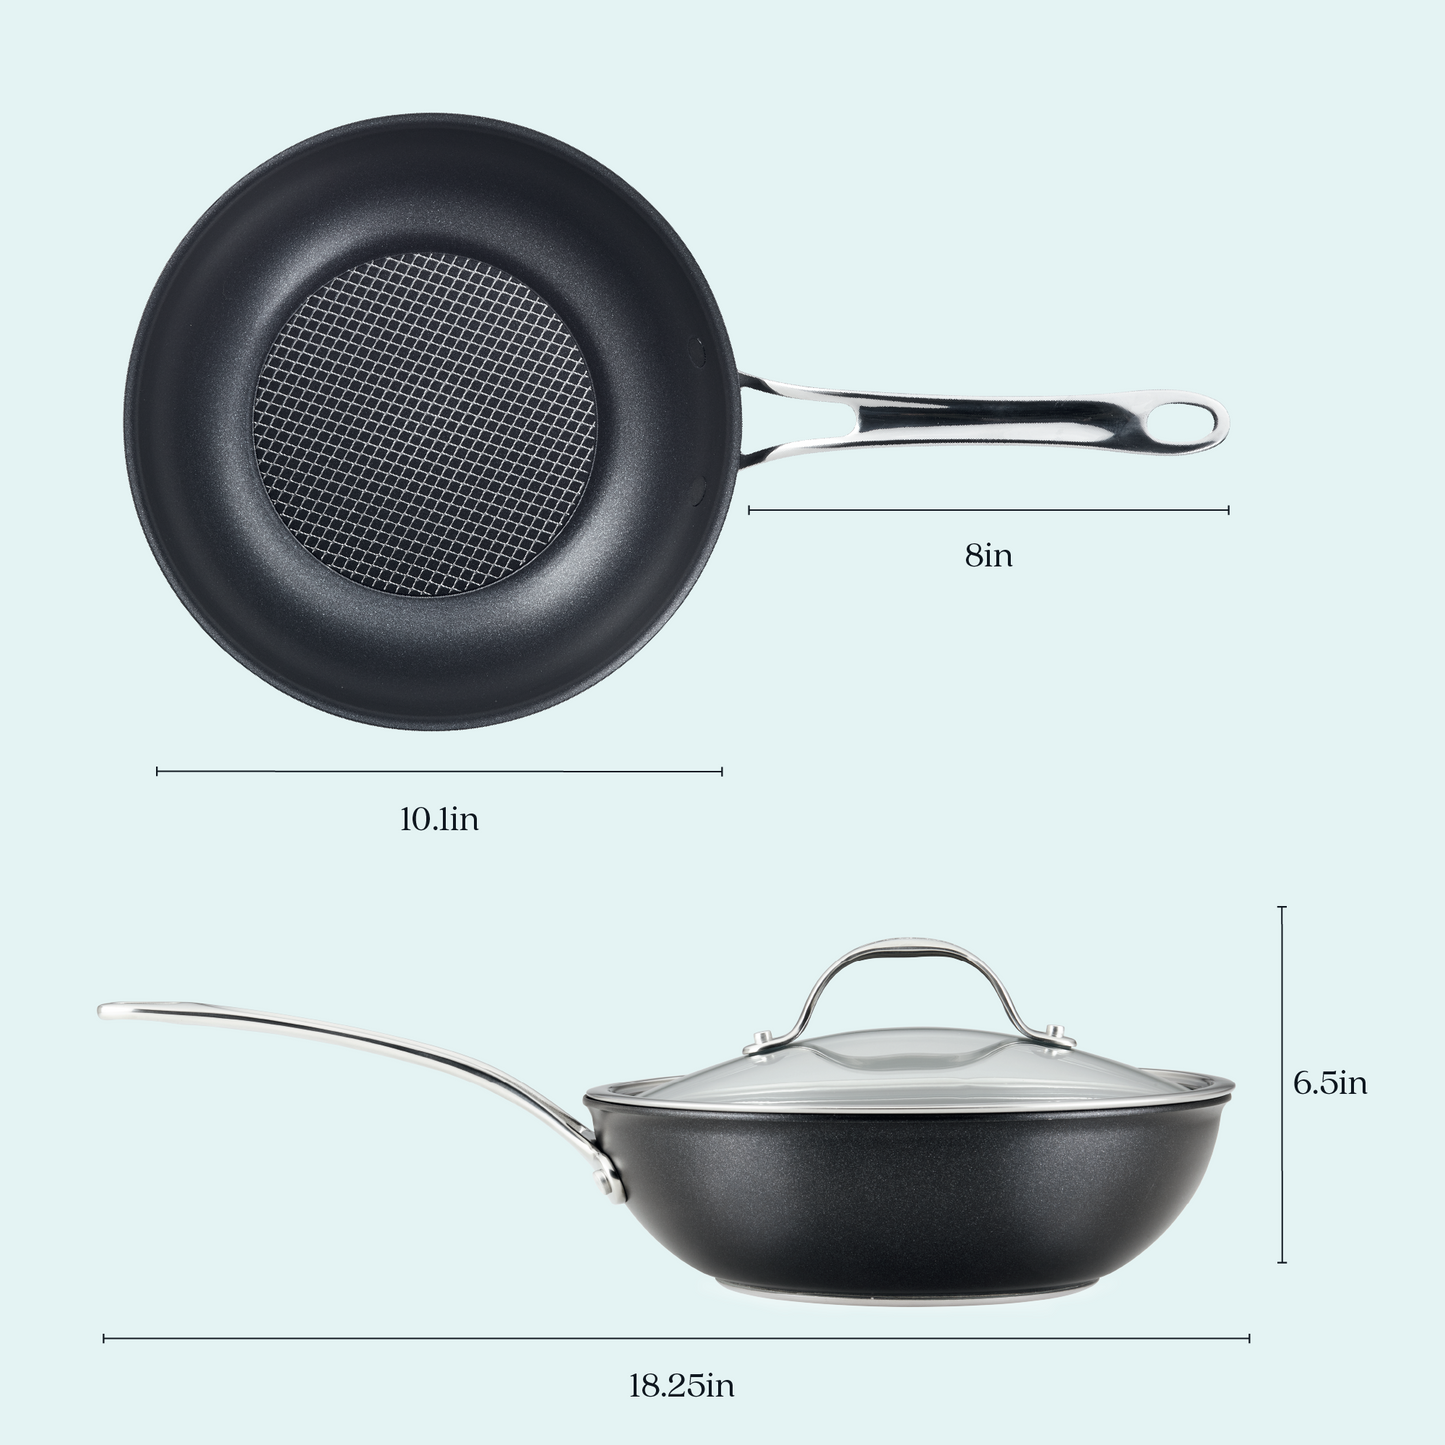 Anolon X Hybrid Nonstick Induction Covered Stirfry 25cm